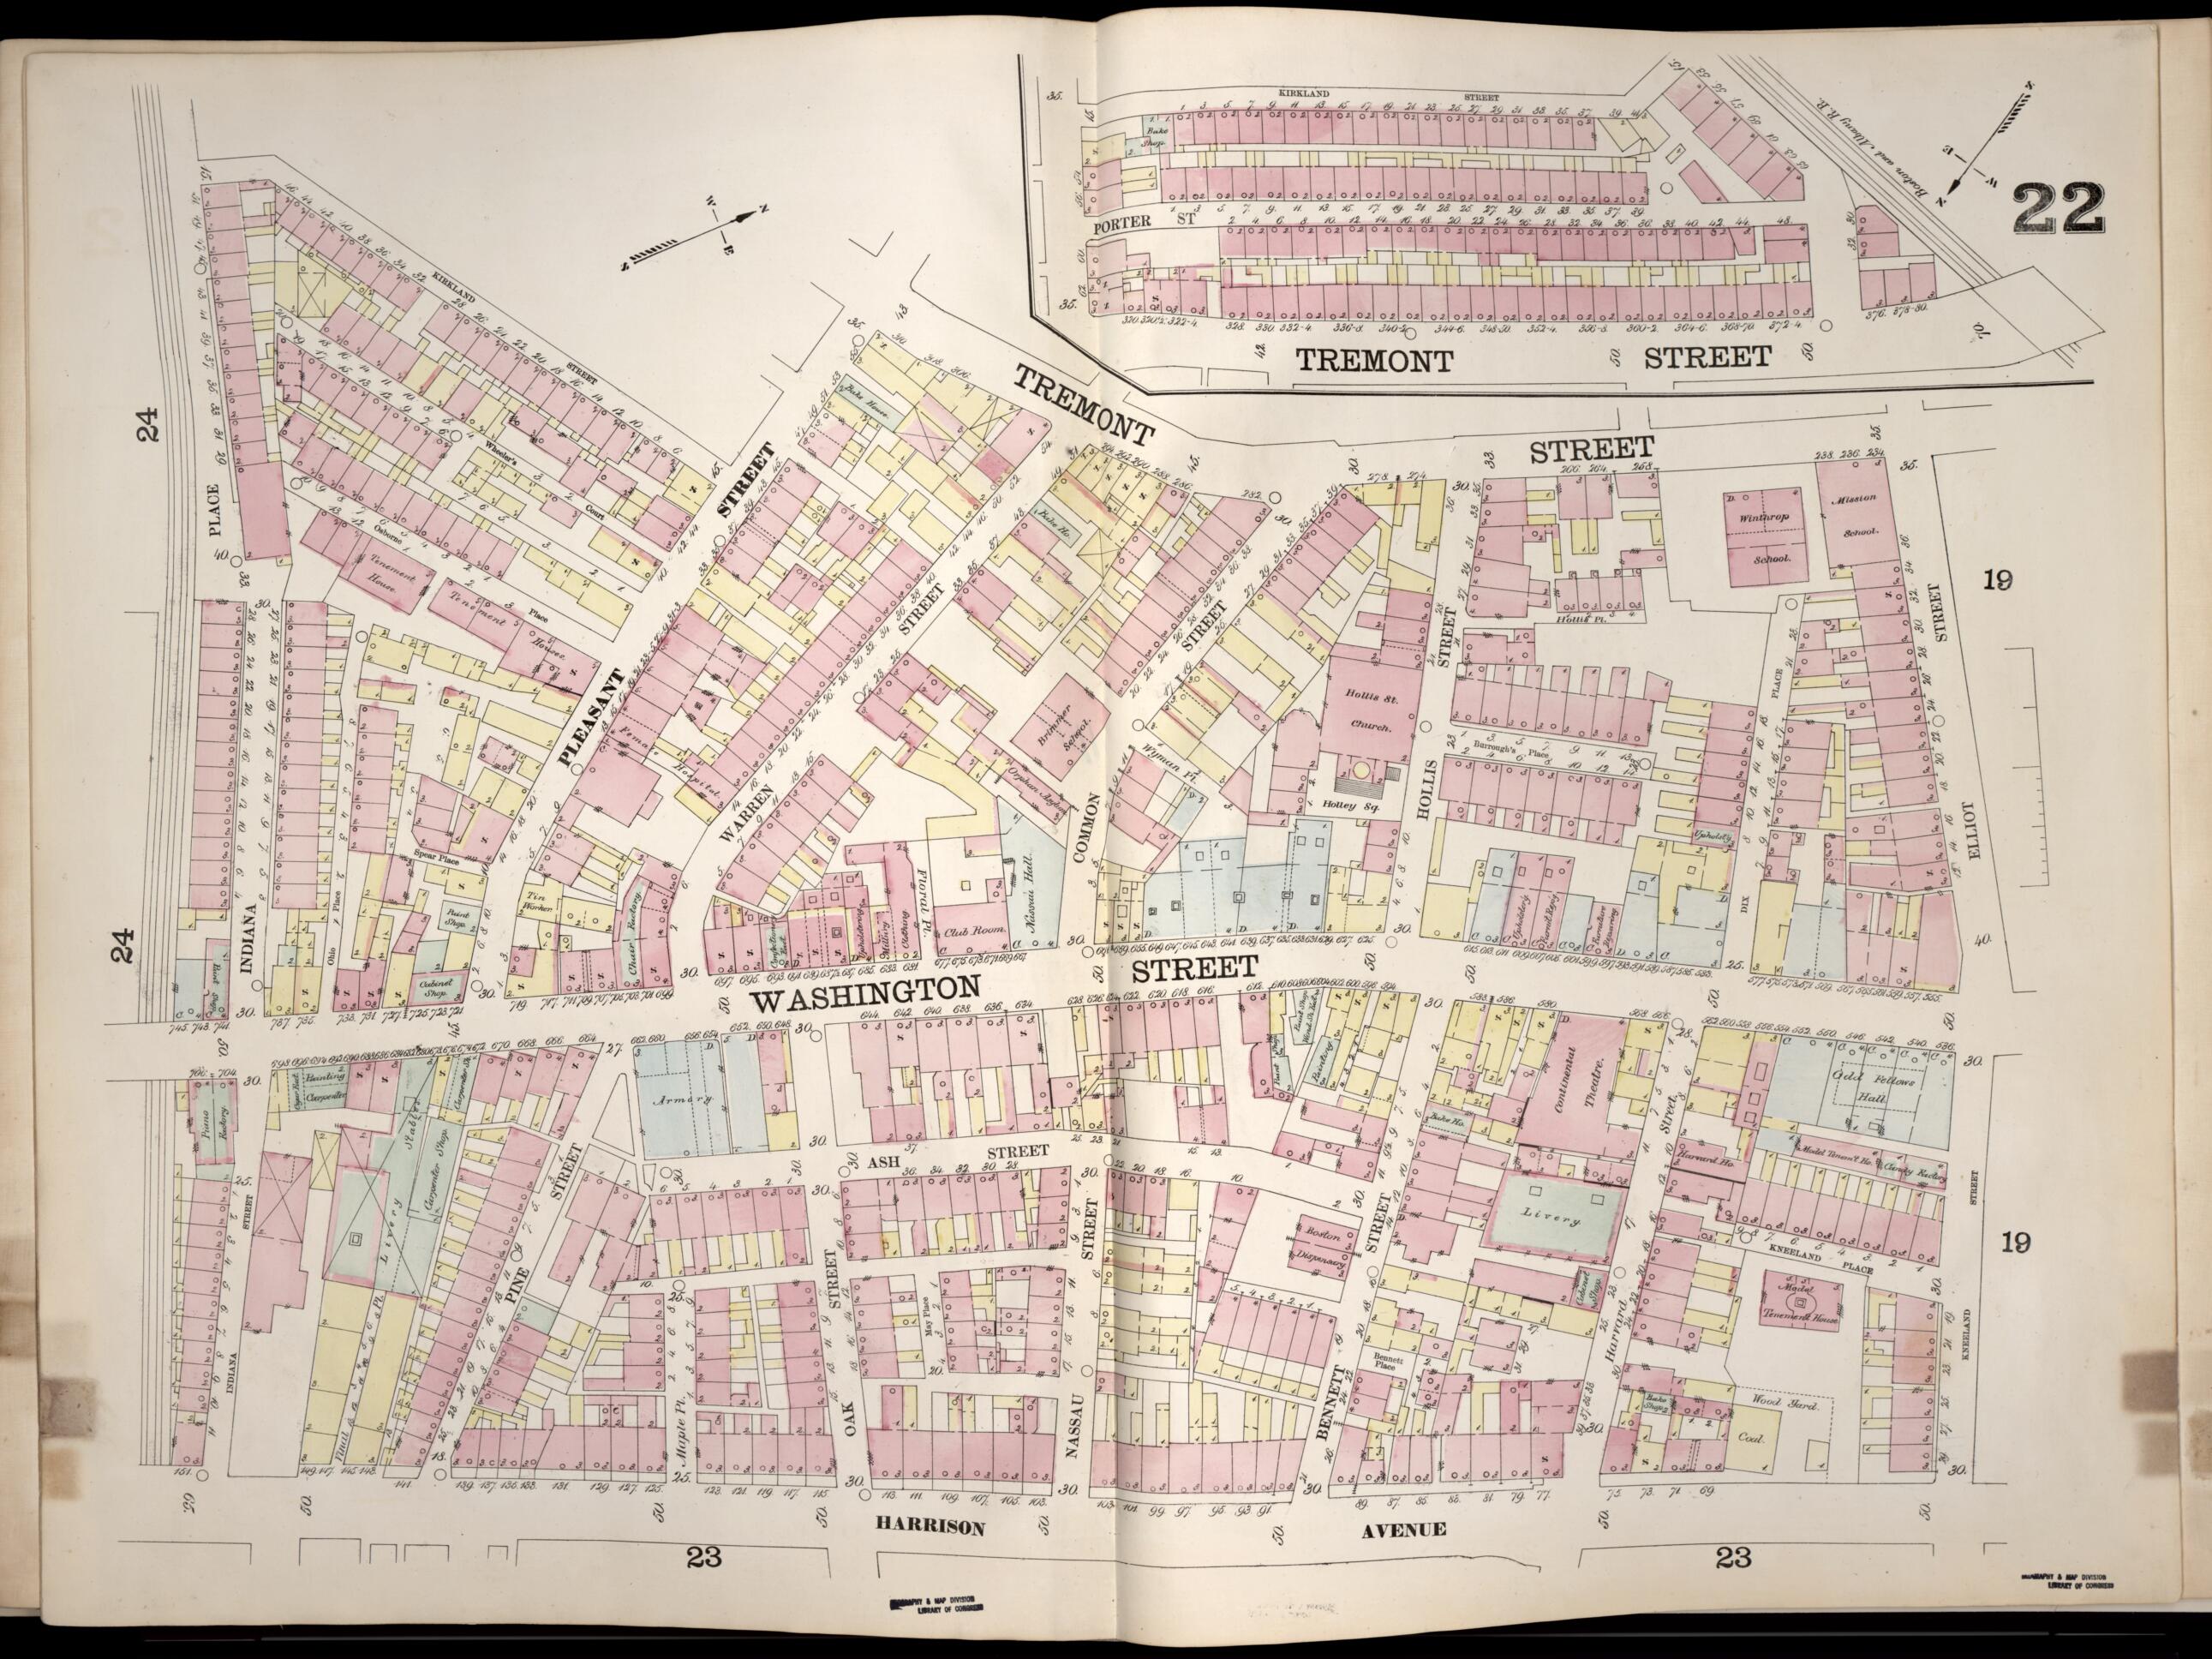 This old map of Image 23 of Boston from Insurance Map of Boston. Volume 1 from 1867 was created by D. A. (Daniel Alfred) Sanborn in 1867